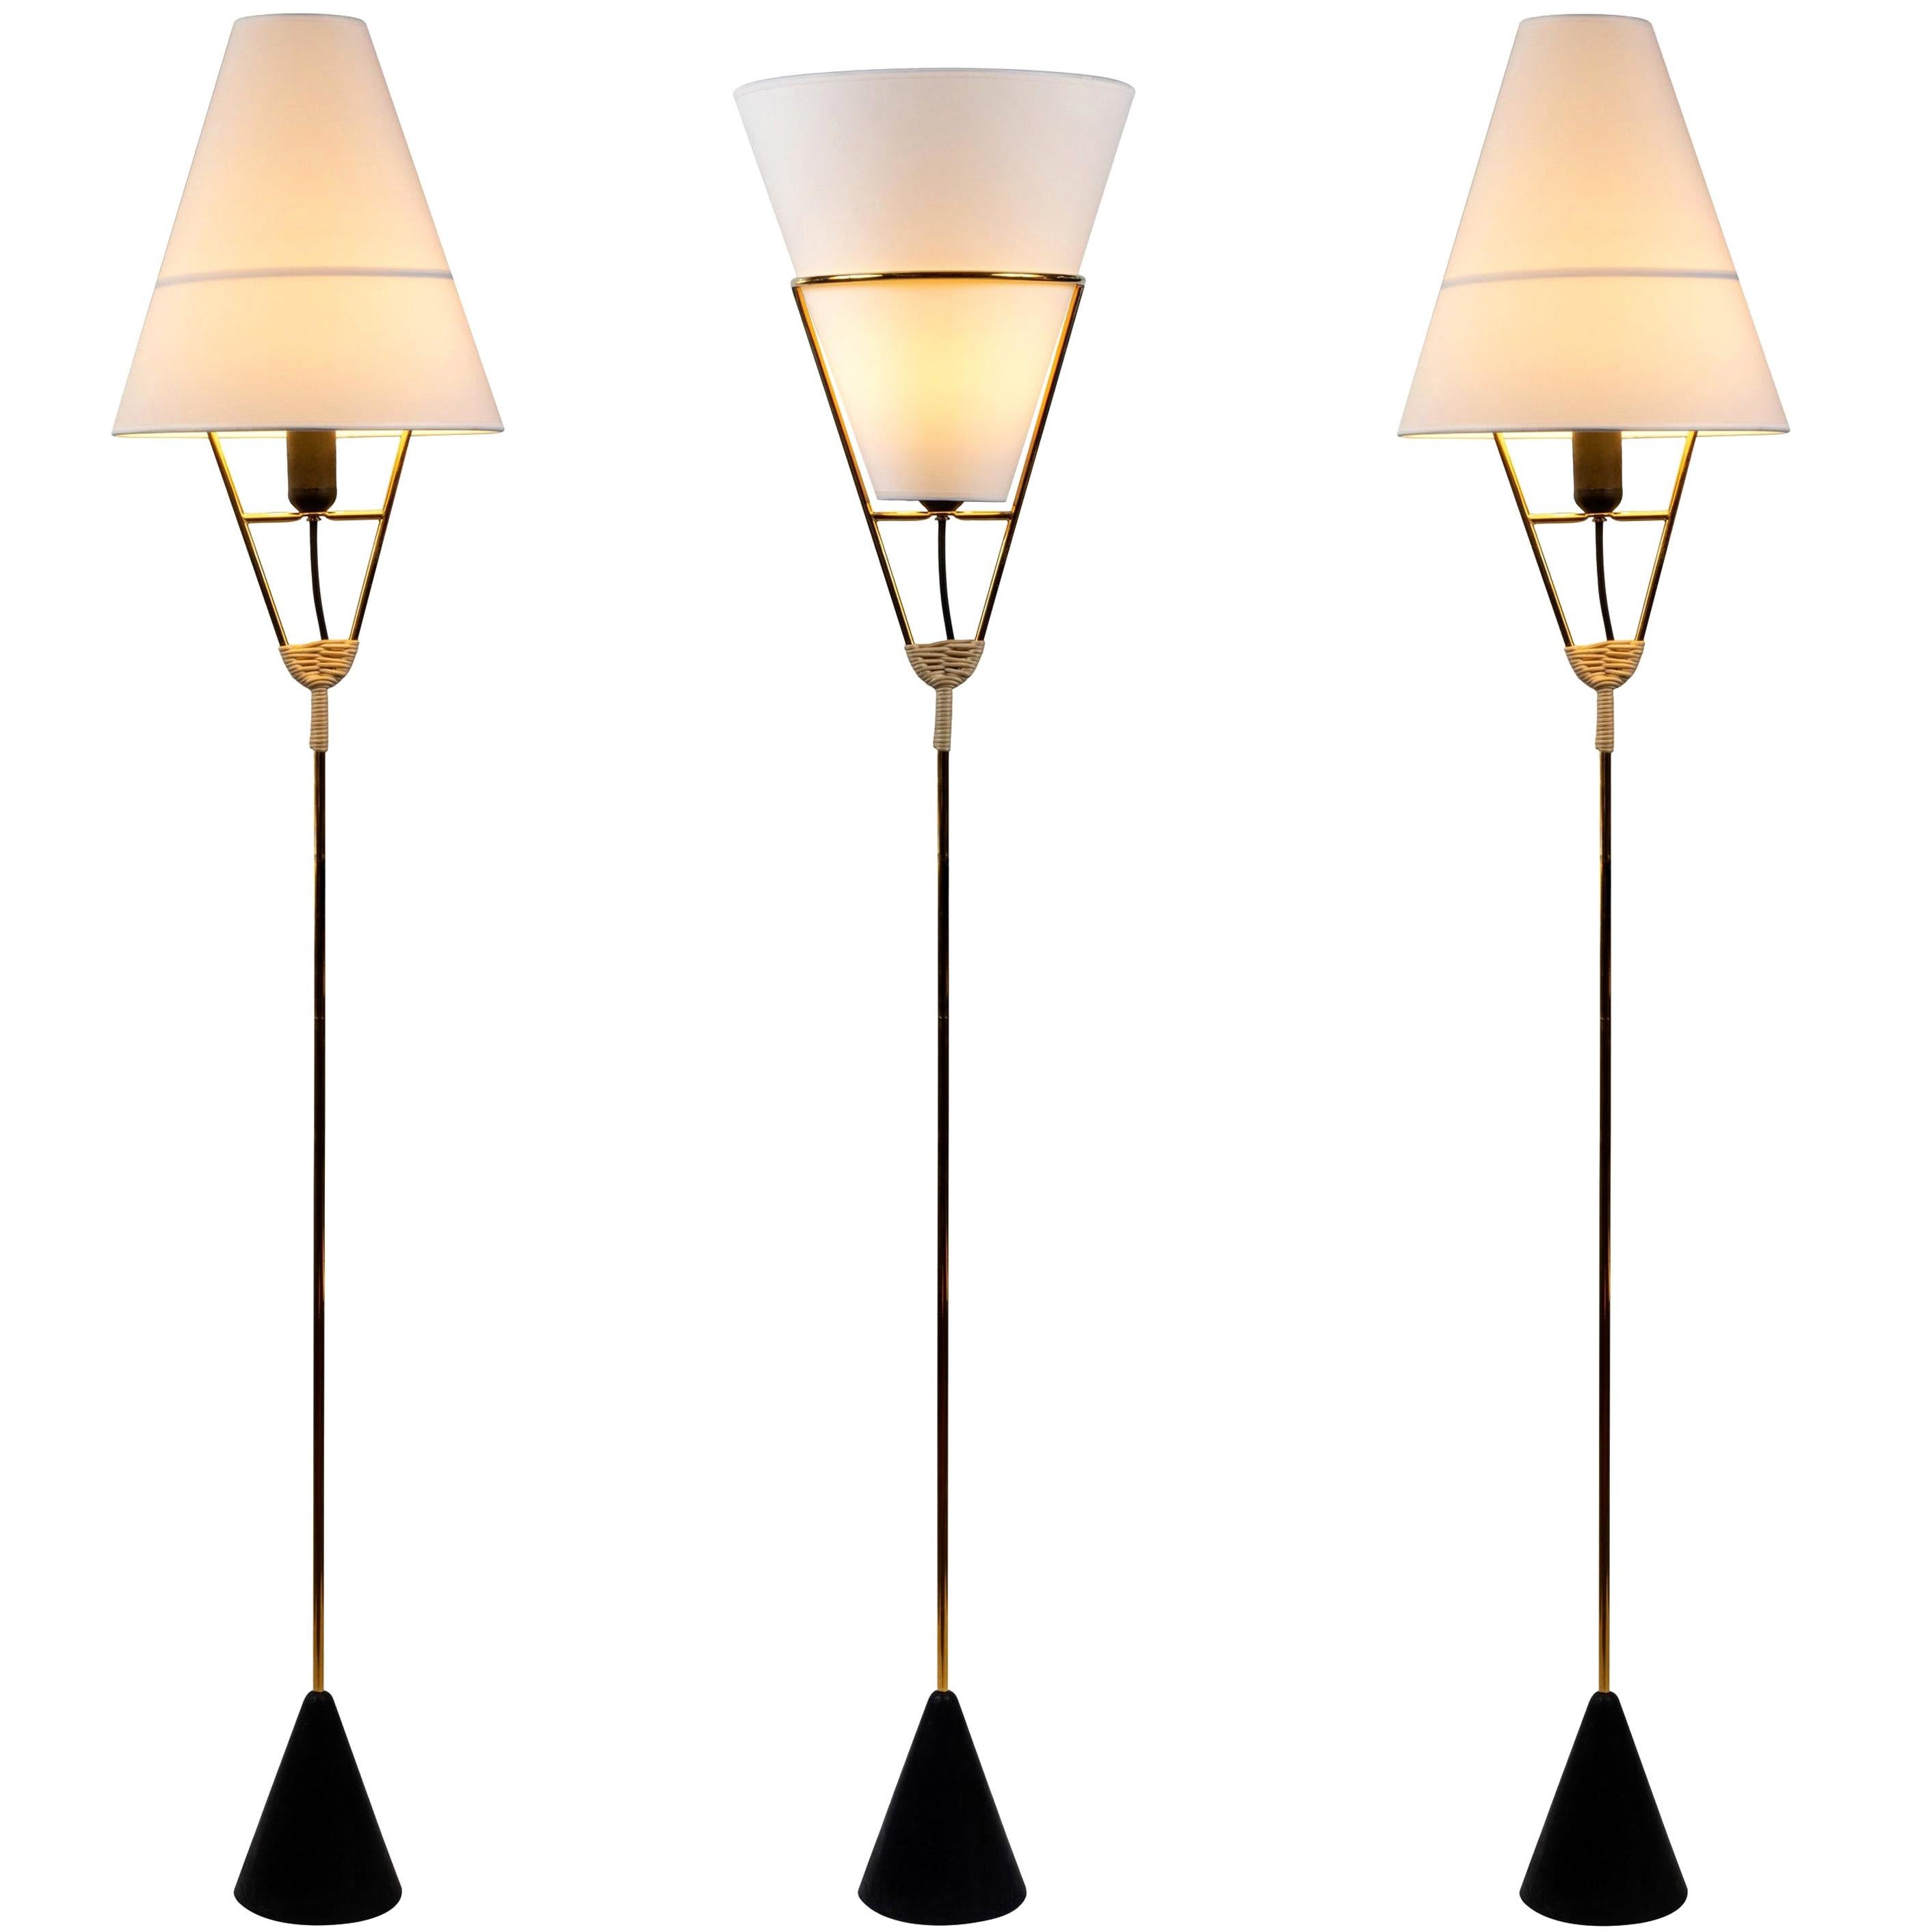 Carl Auböck vice versa floor lamp. These iconic and Minimalist Viennese floor lamps are executed in brass, wicker and cast iron designed by Werkstätte Carl Auböck, Austria, circa 1950.

Price is per item. Three in stock. Out of stock lead time